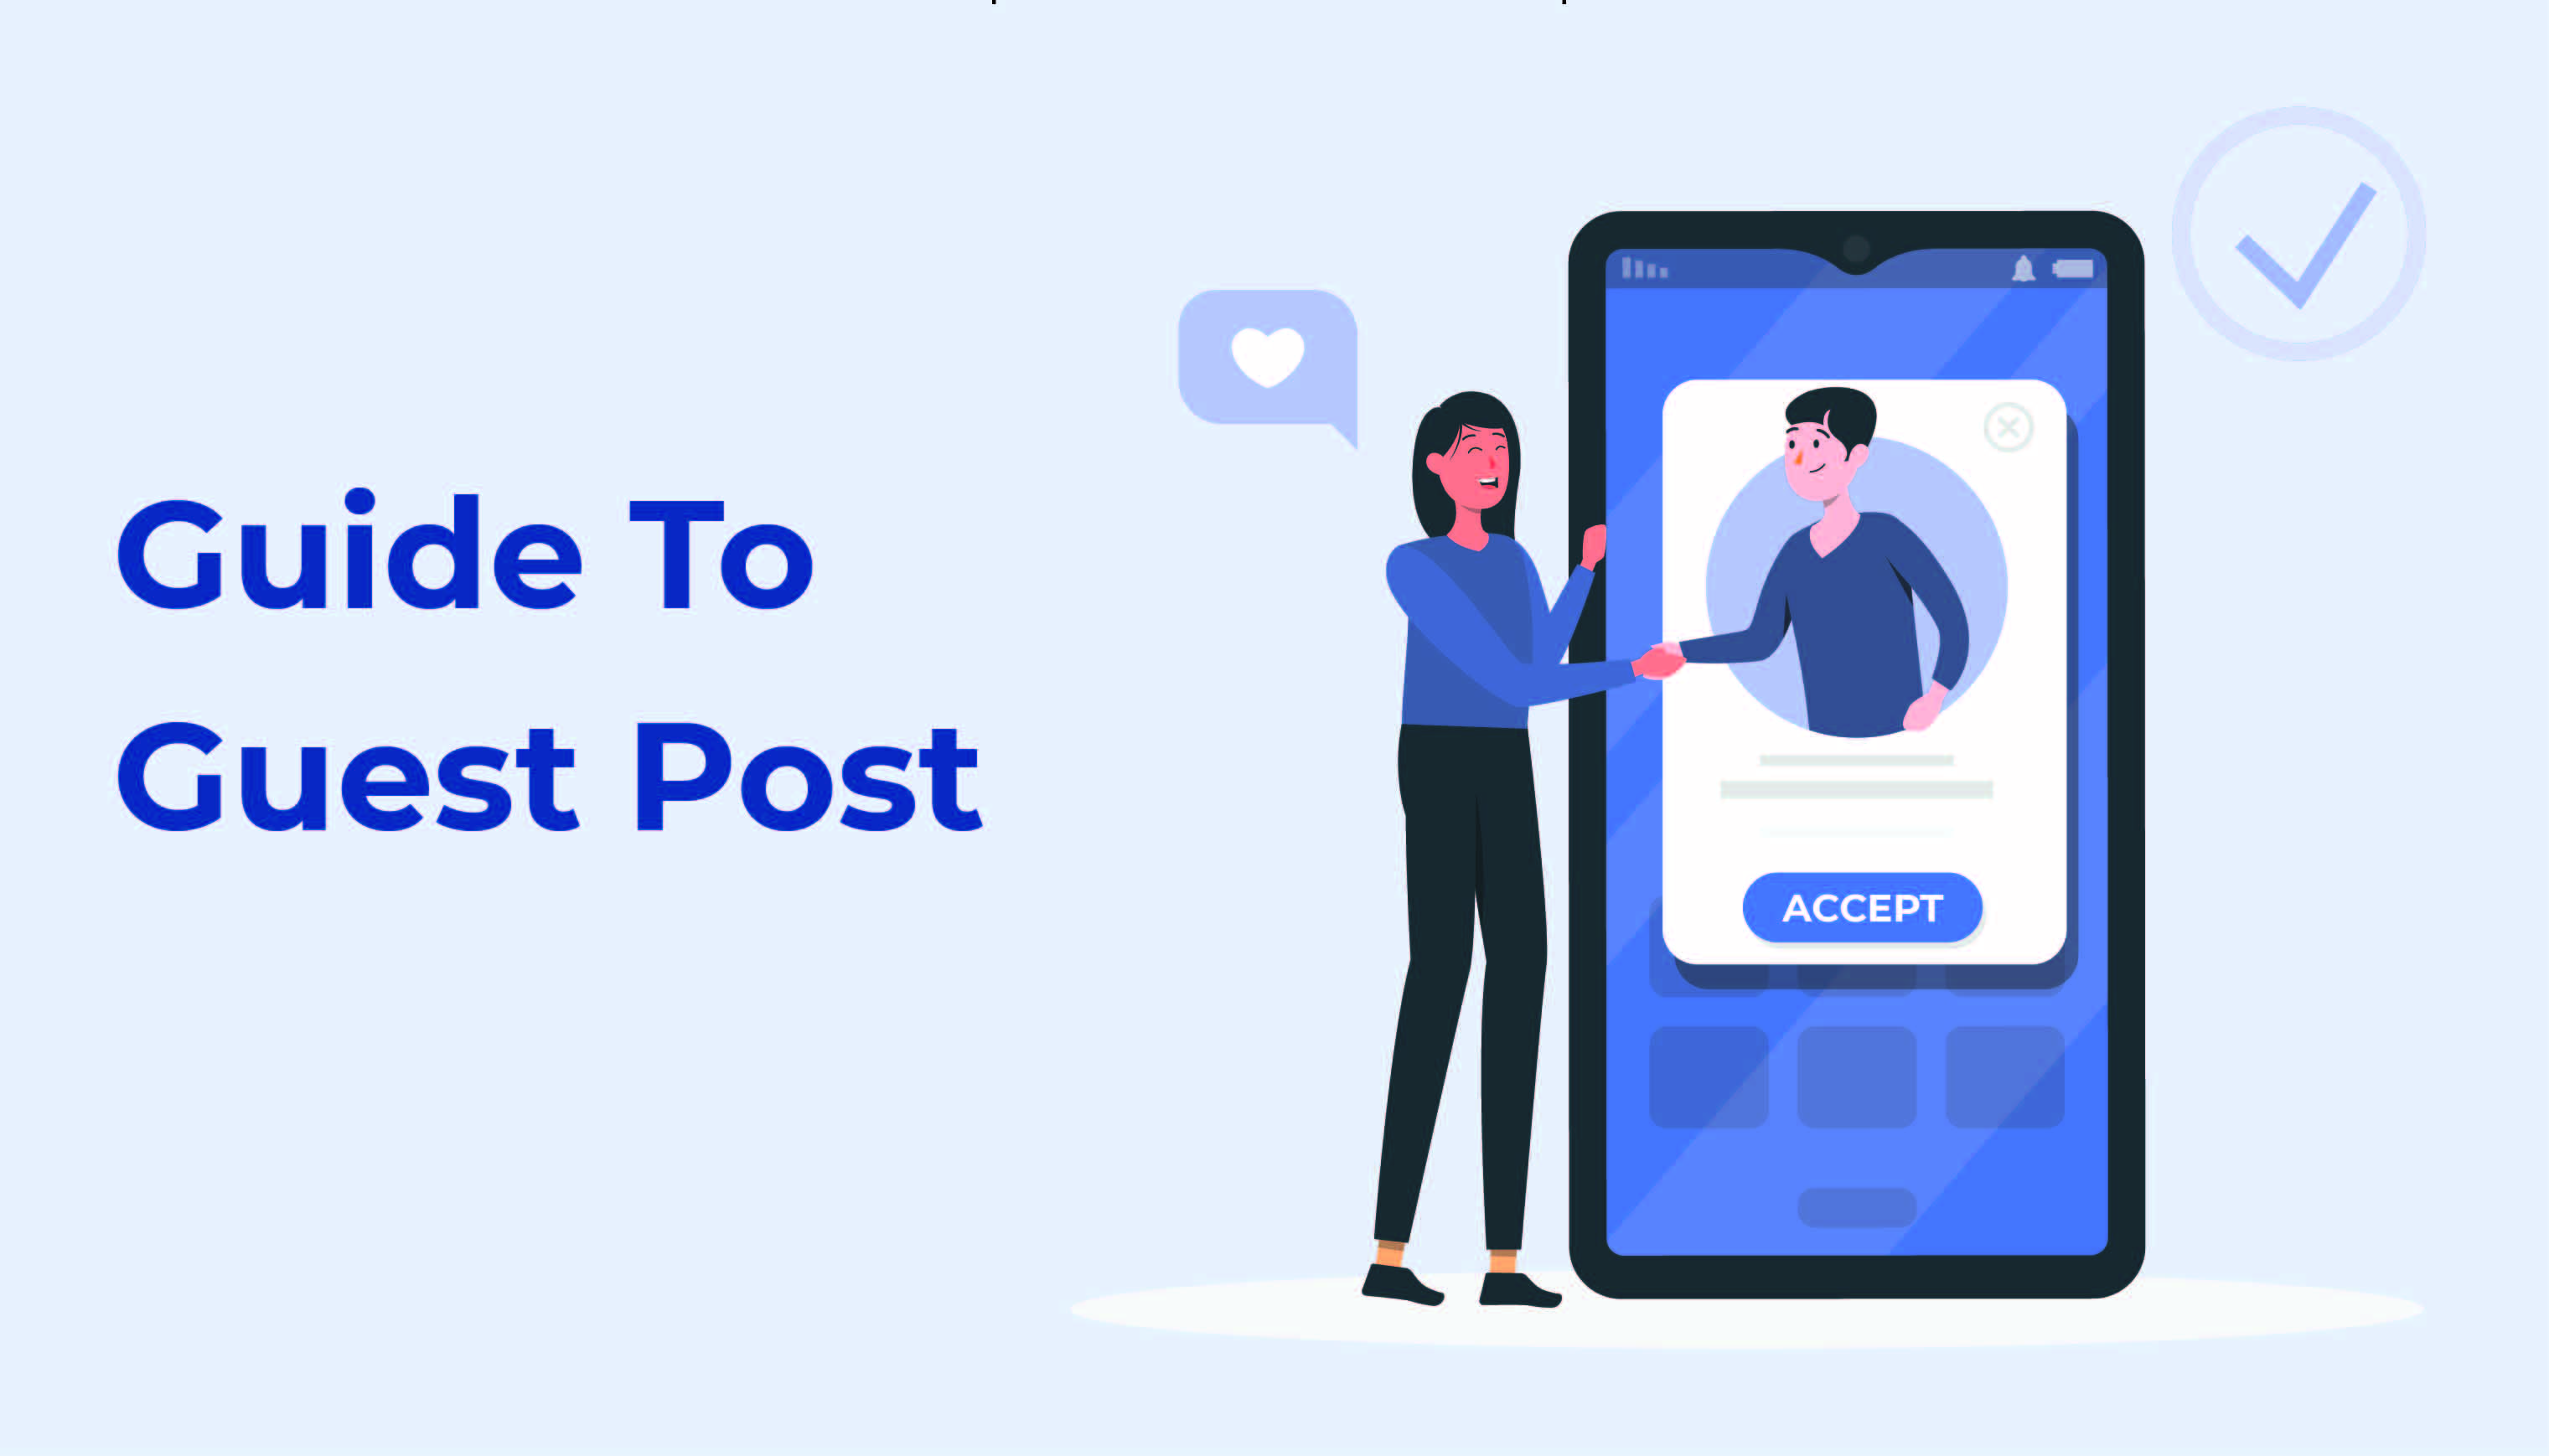 How To Request To Guest Post And Get Accepted